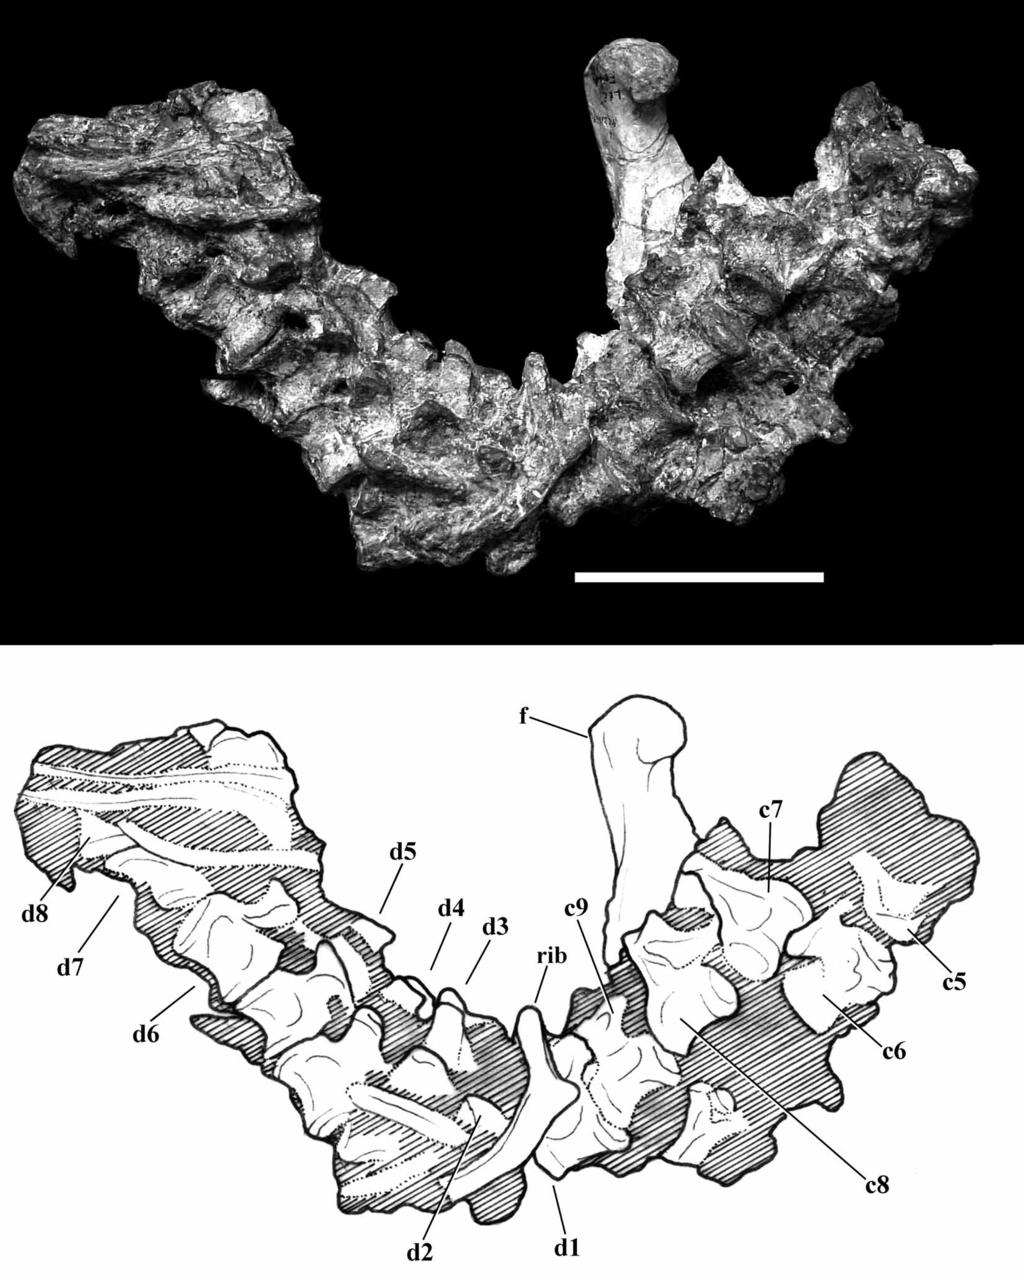 FIGURE 8. Photograph and drawing of cervical and dorsal vertebrae embedded within sediment along with the left femur, in right lateral view.